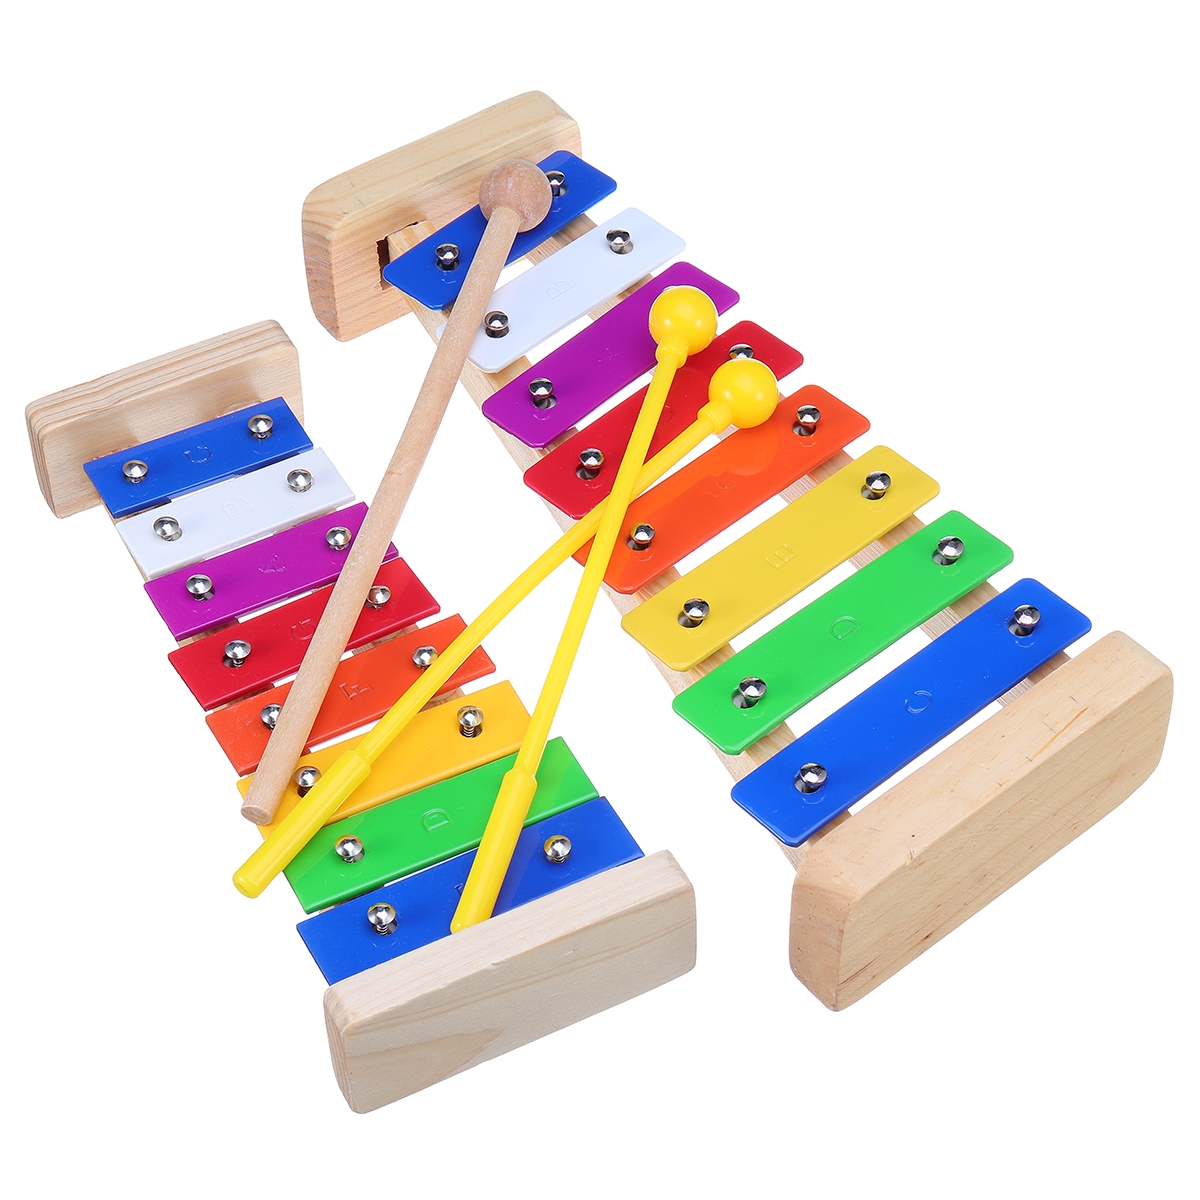 8 Notes Wooden Xylophone Education Musical Toy for Children